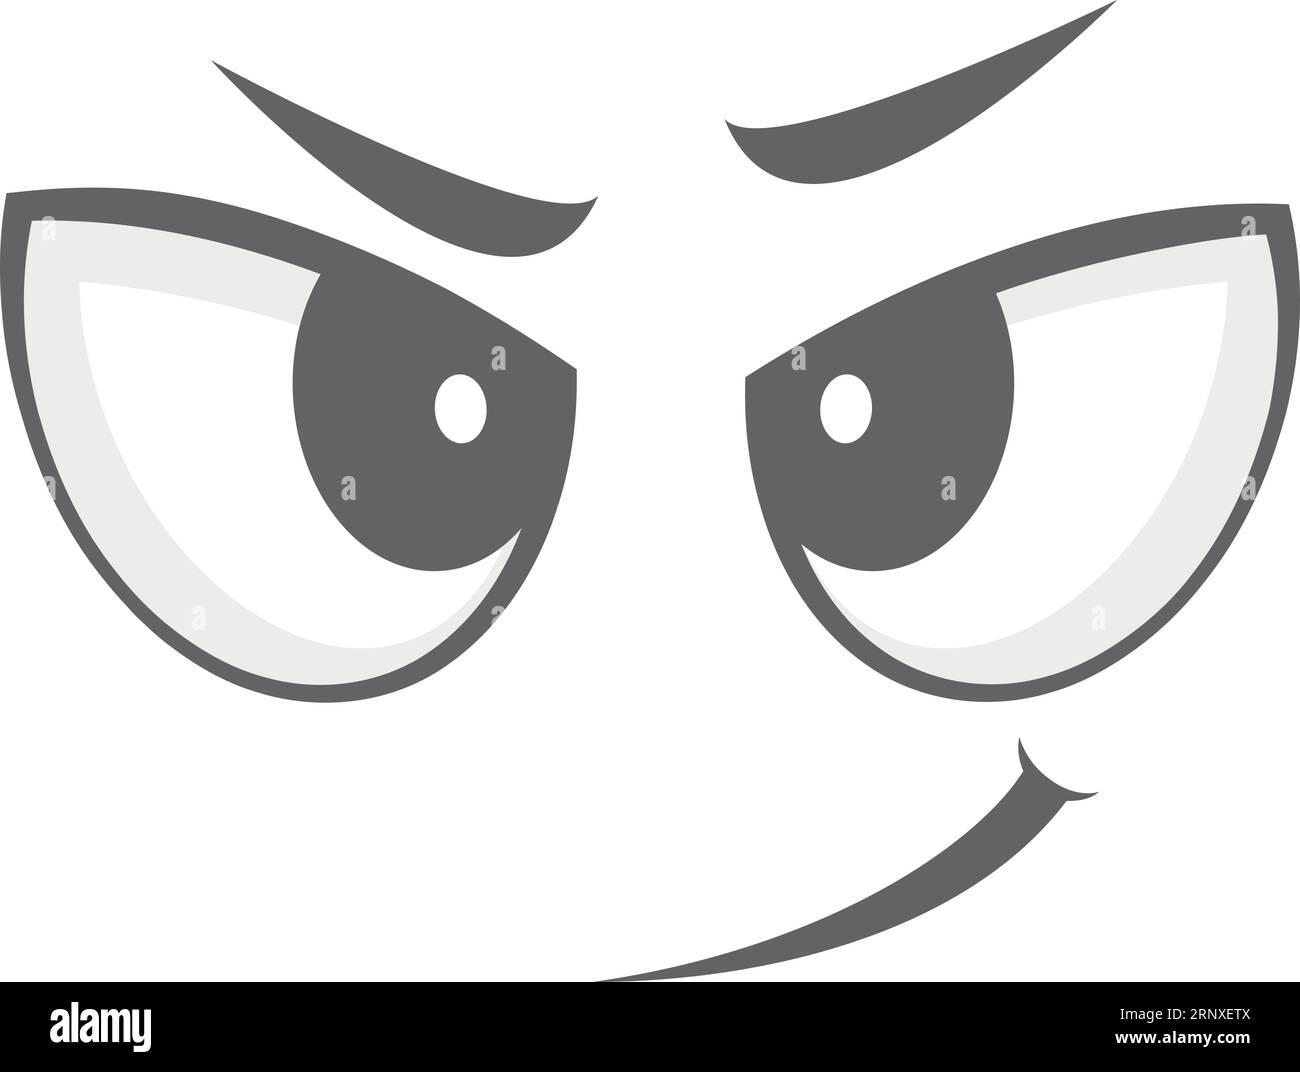 Smirking face emoji. Funny grinning comic expression Stock Vector